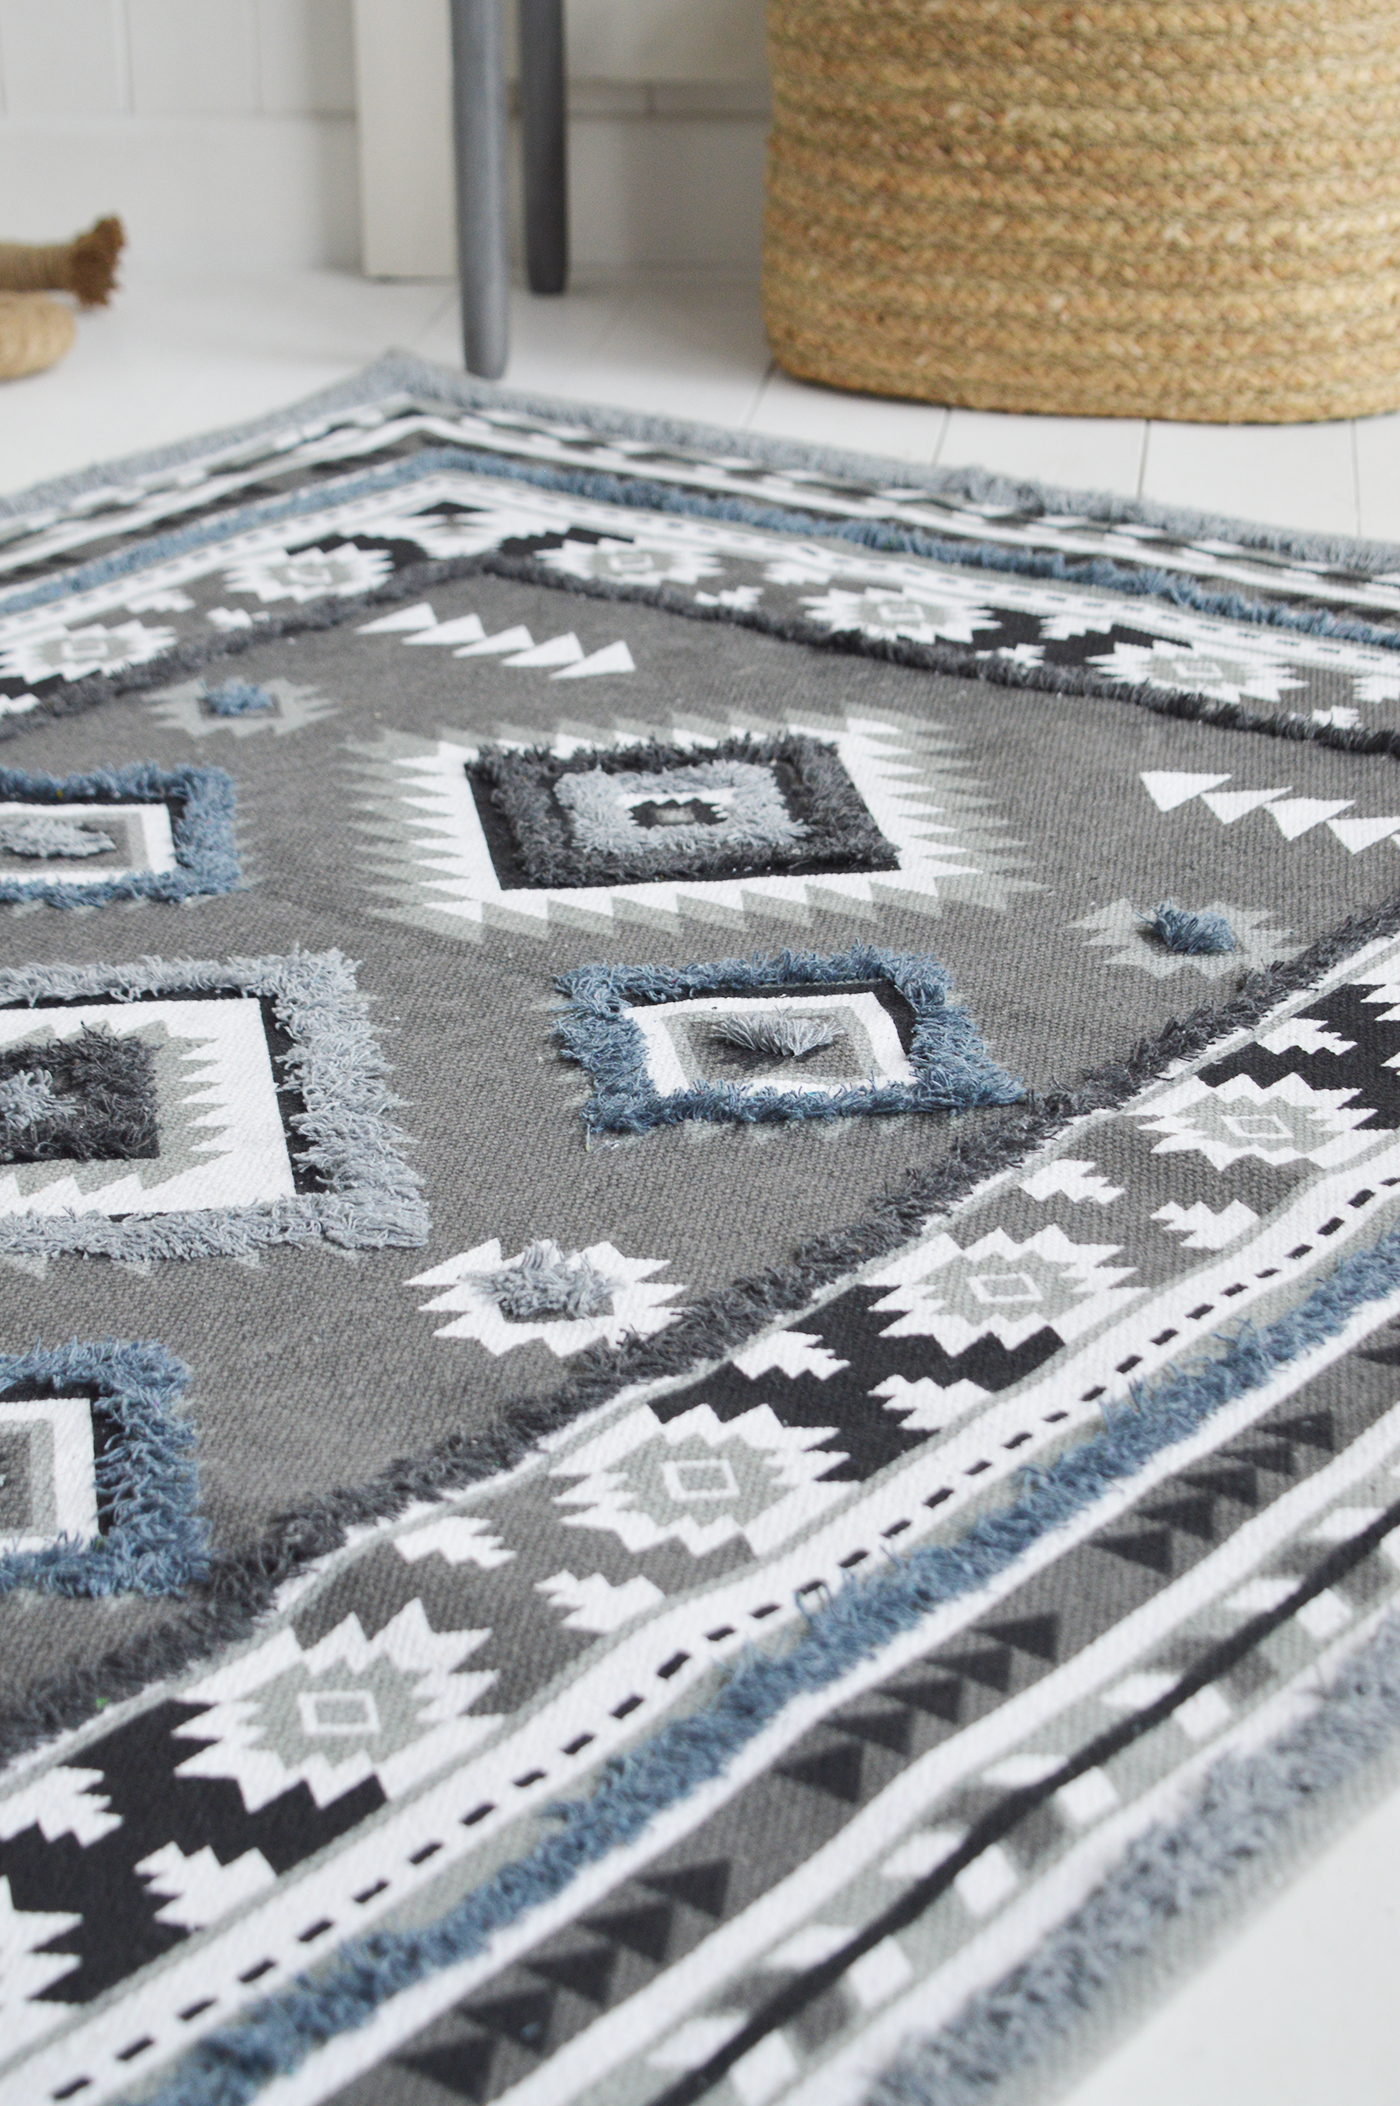 Chatham Floor Rug for New England homes and Interiors. Coastal and country furniture and home accessories